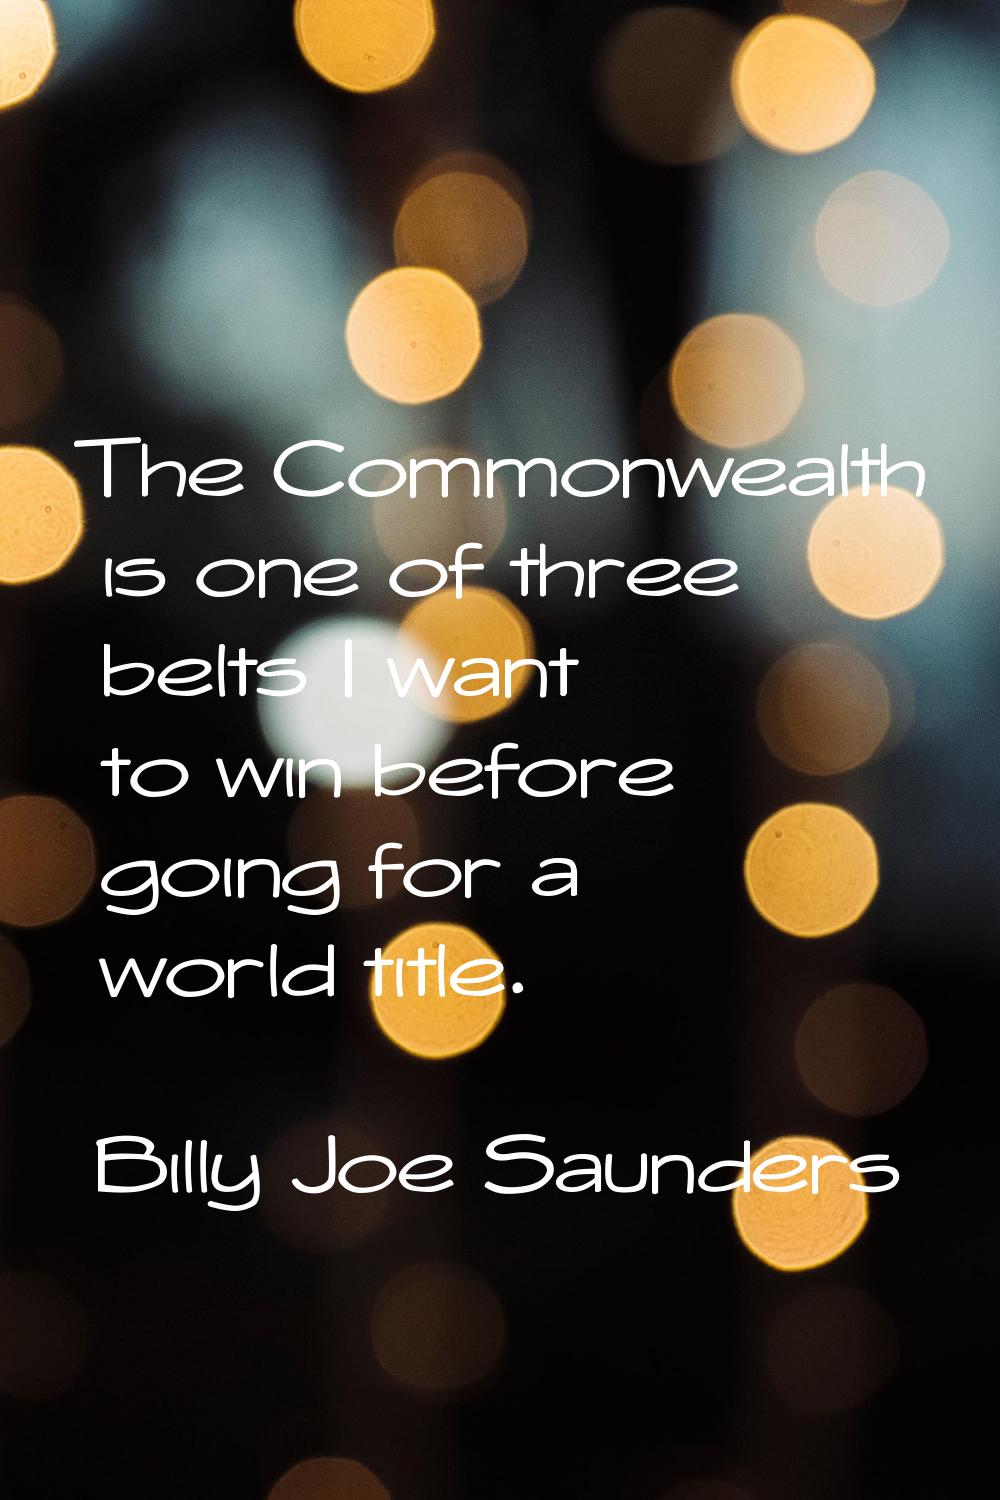 The Commonwealth is one of three belts I want to win before going for a world title.